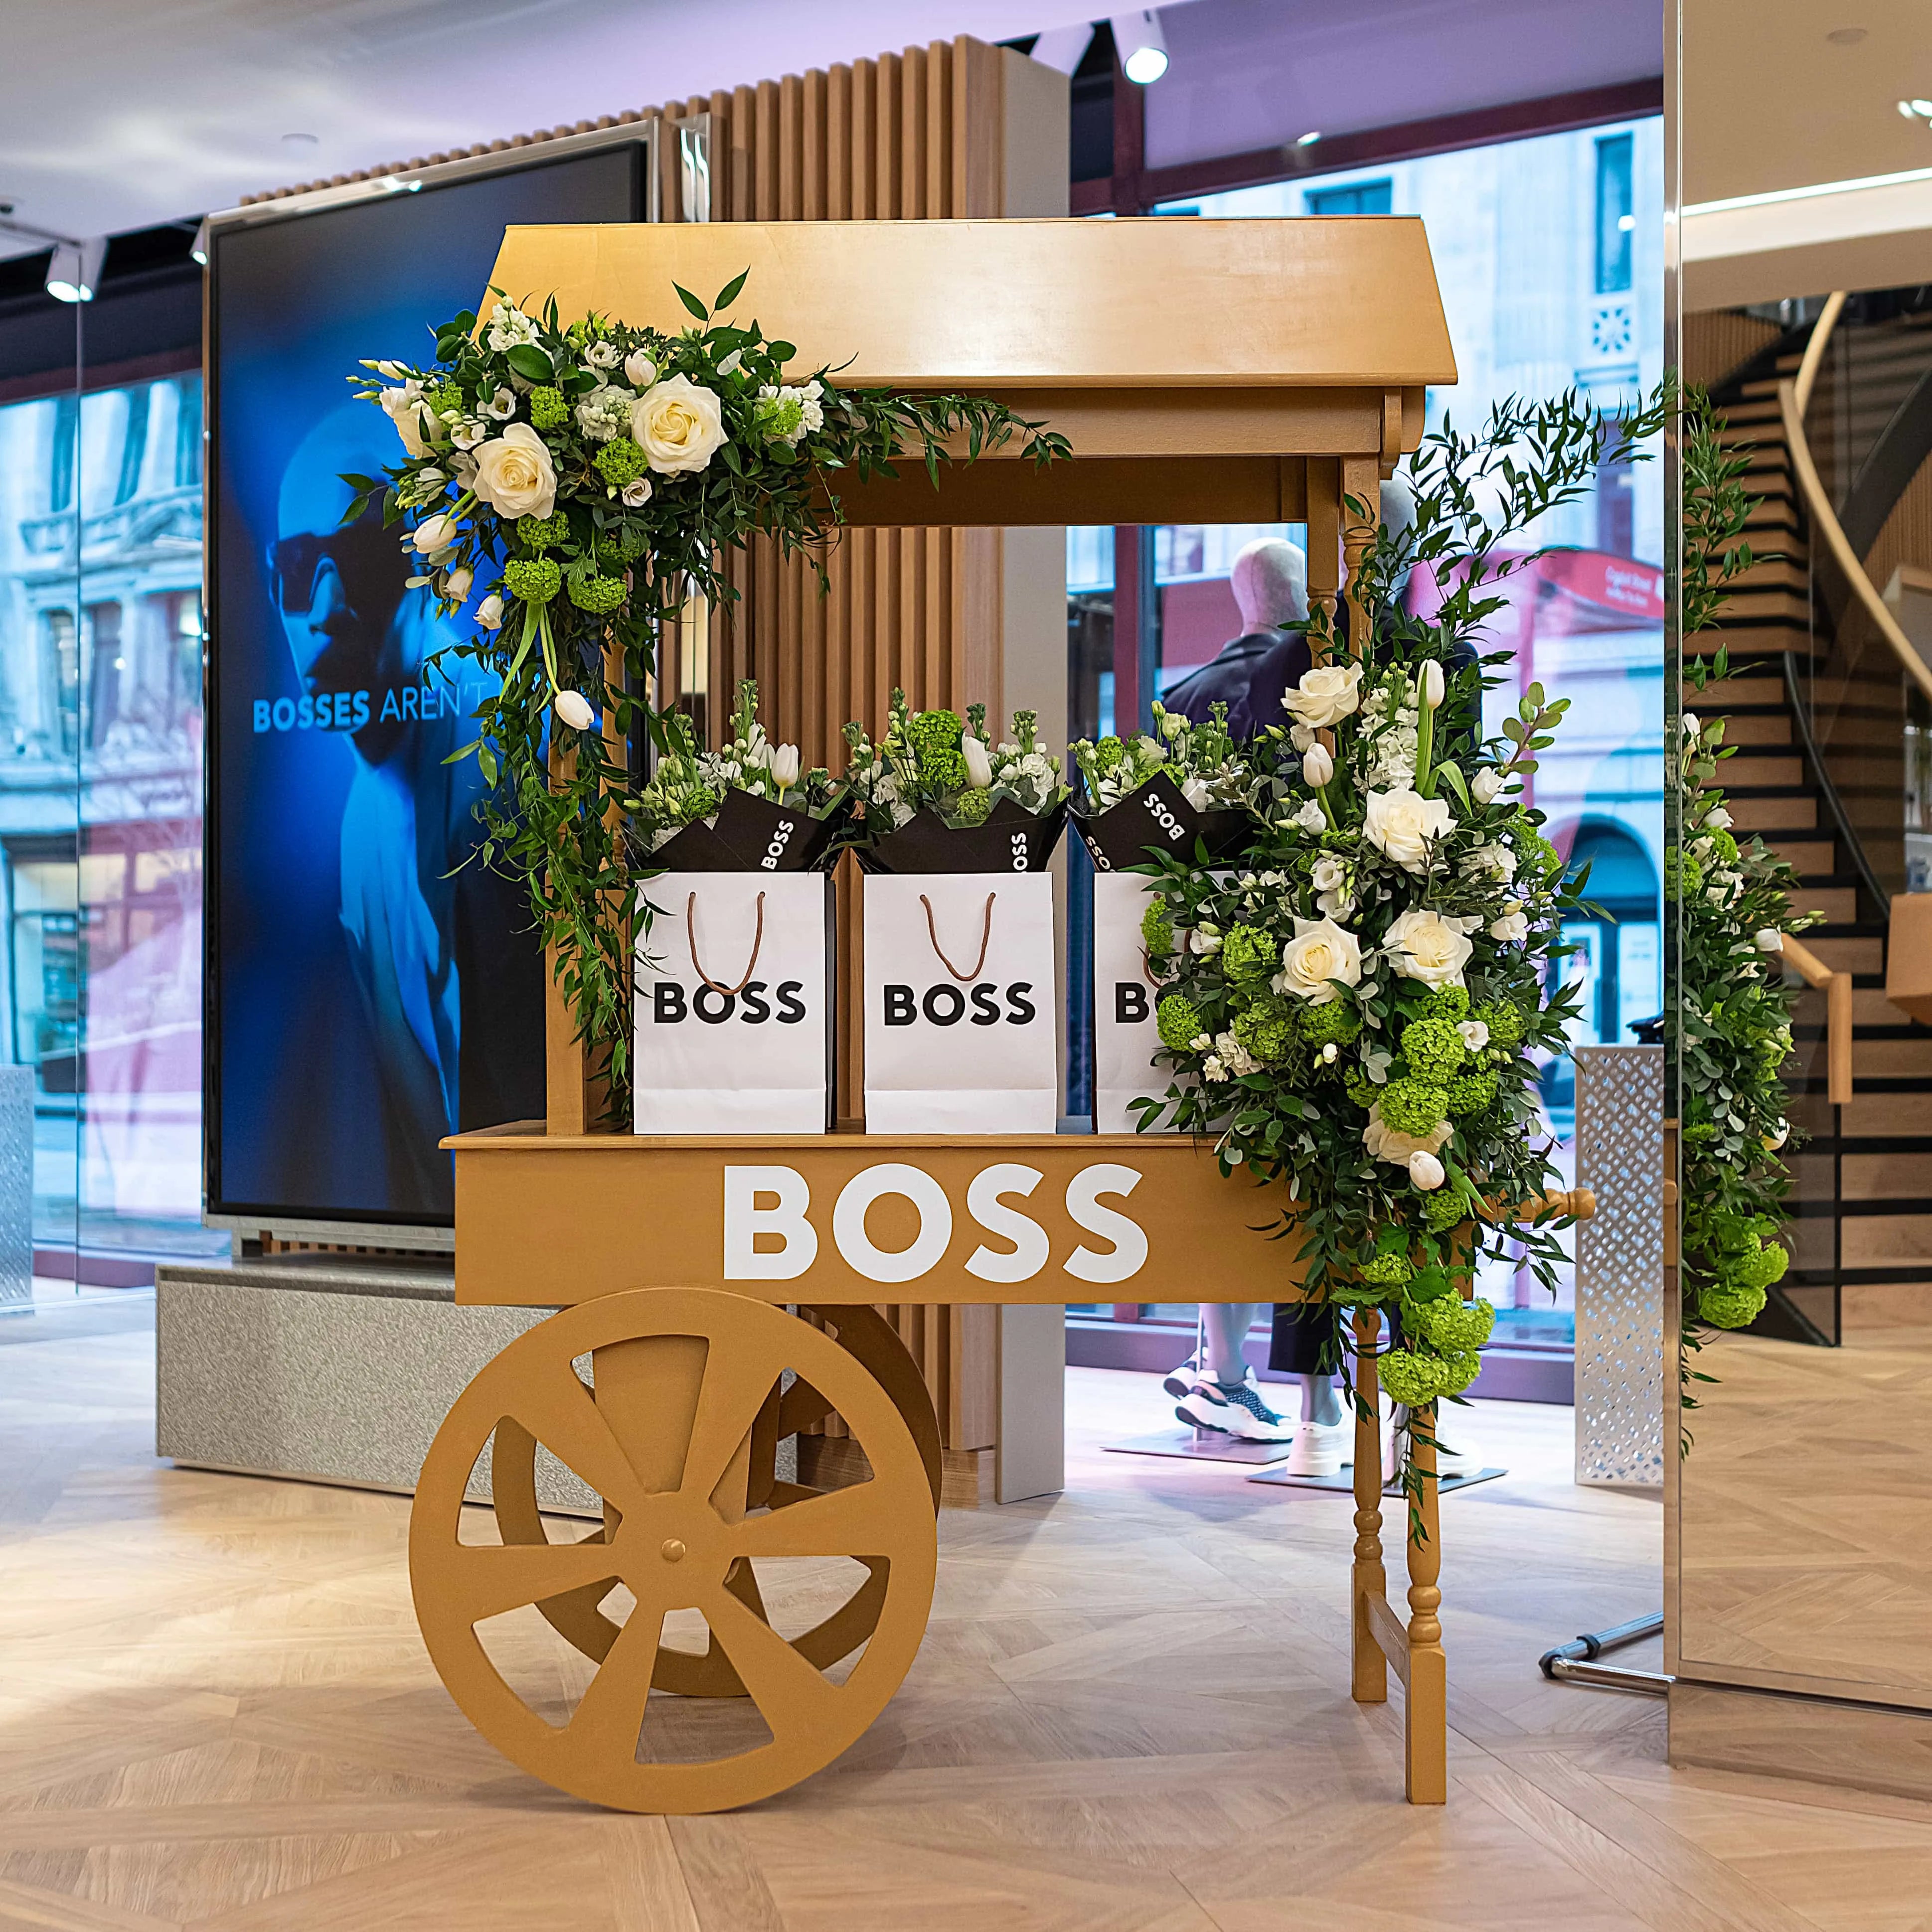 A bespoke flower cart created using preserved flowers for Hugo Boss for their Mother’s Day campaign